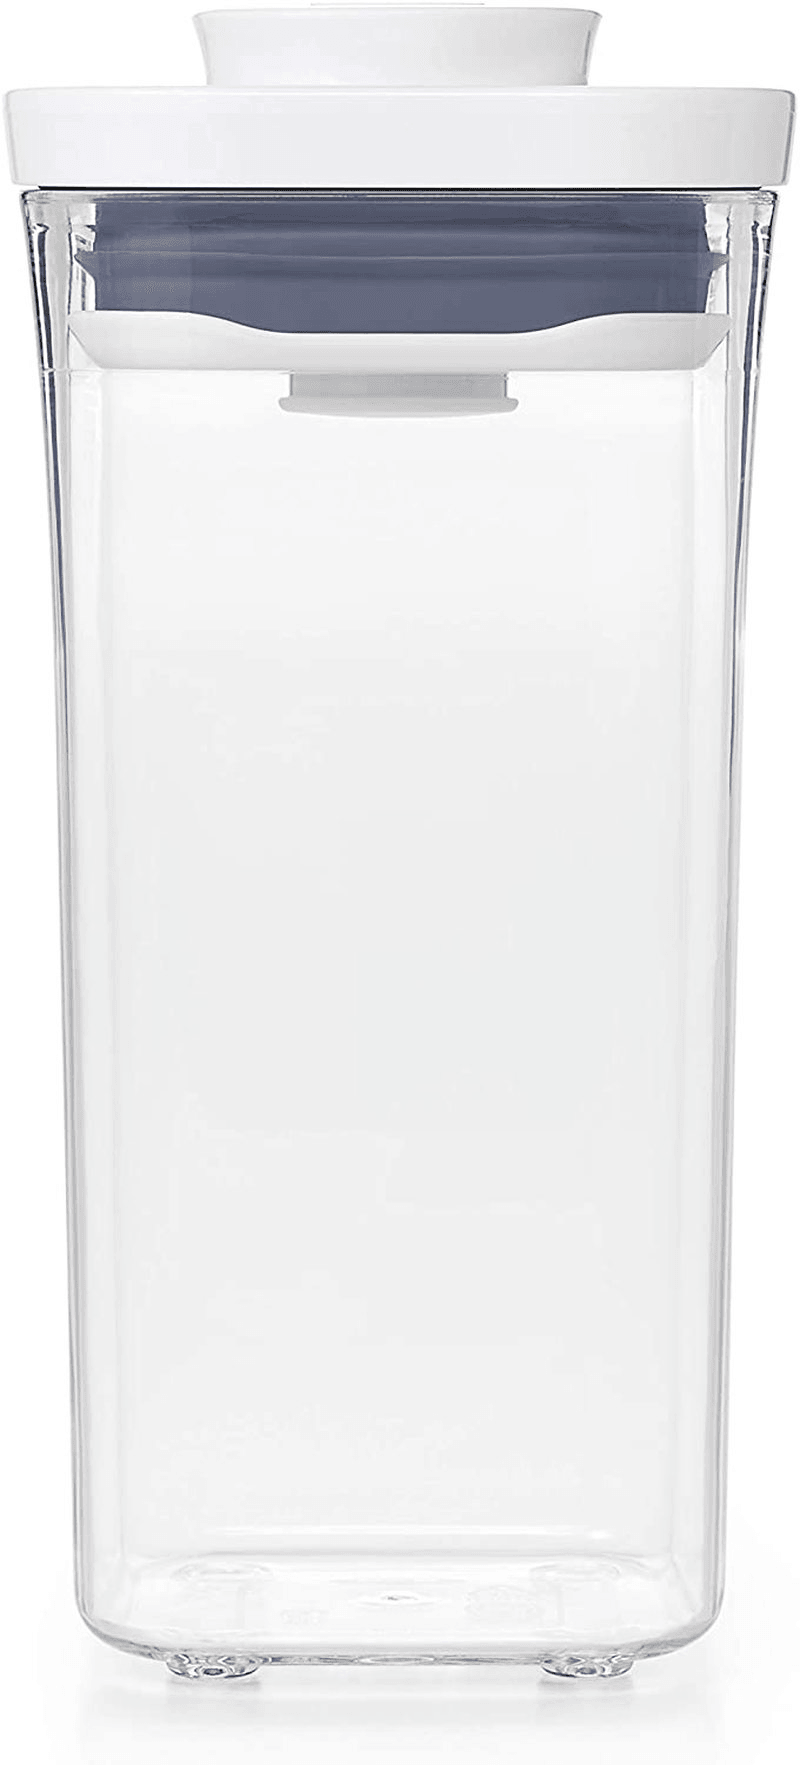 OXO Oxo Good Grips Pop Container Slim Rectangle Short 